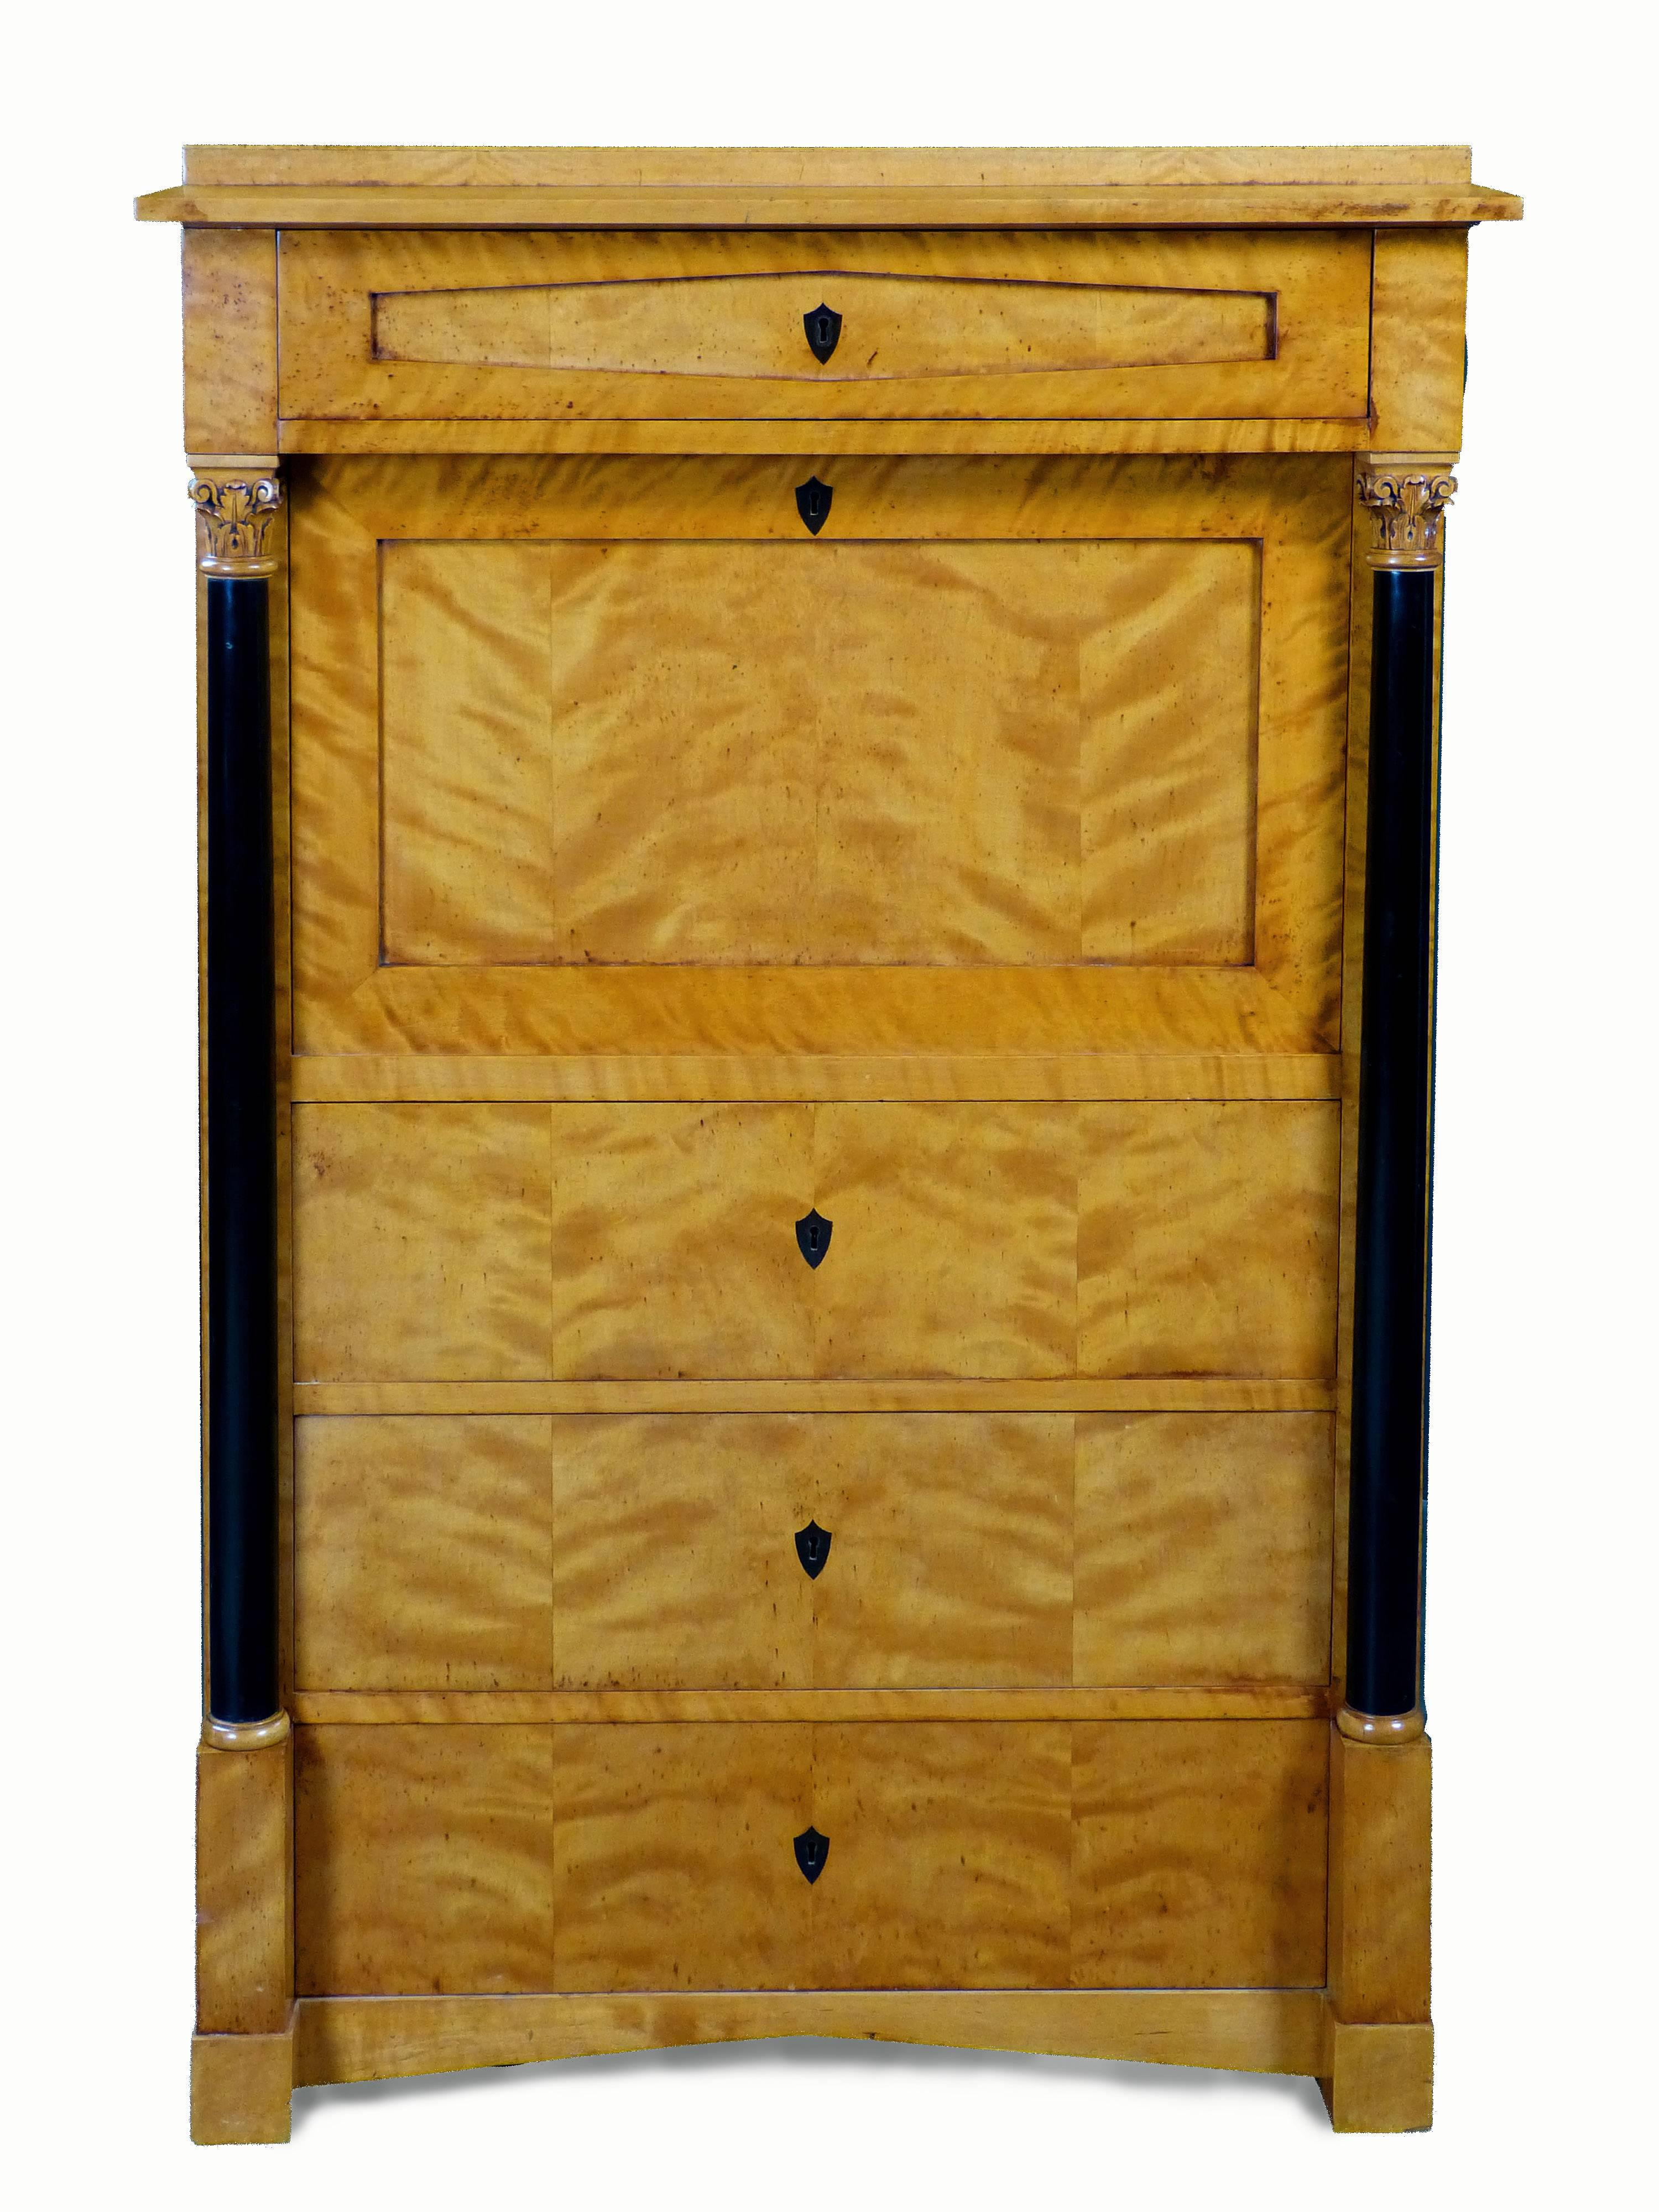 Exquisite Biedermeier secretaire on small dimensions and of Swedish origin, with exterior of satin birch, having ebonized frontal columns with carved tops and 4 large drawers with keys and buffalo Horn shield shaped escutcheons/key holes. The